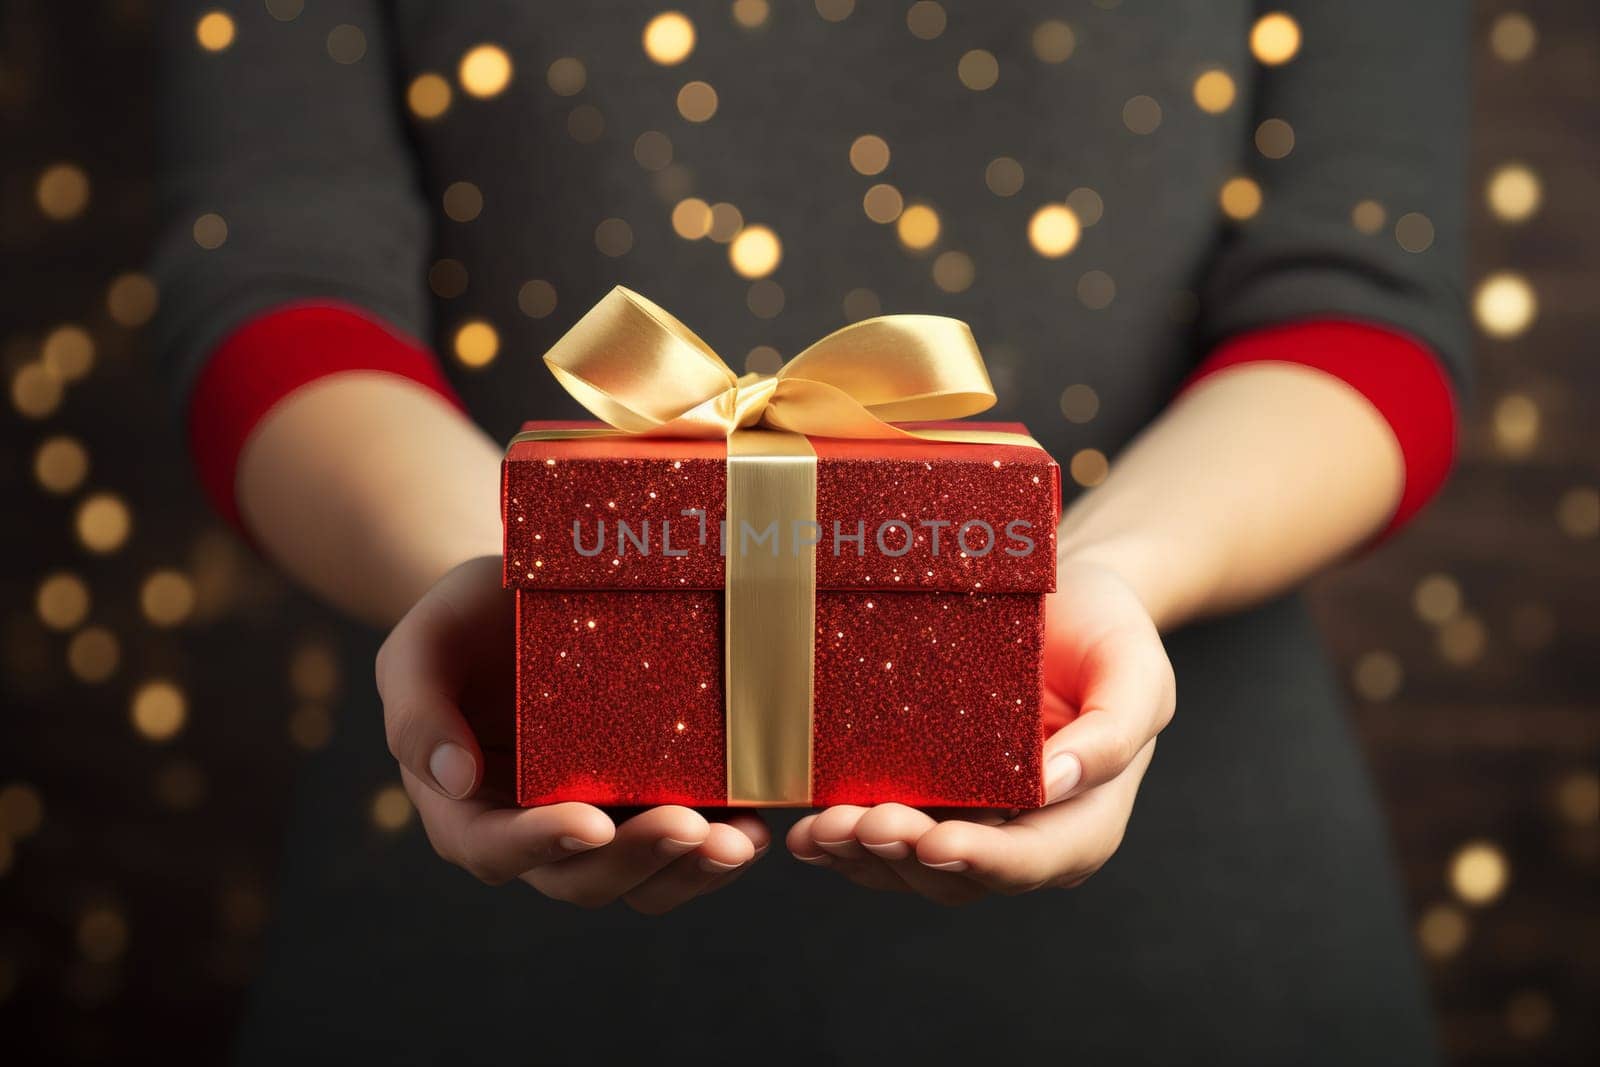 Female hands holding gift box on bokeh blurred background, holidays concept